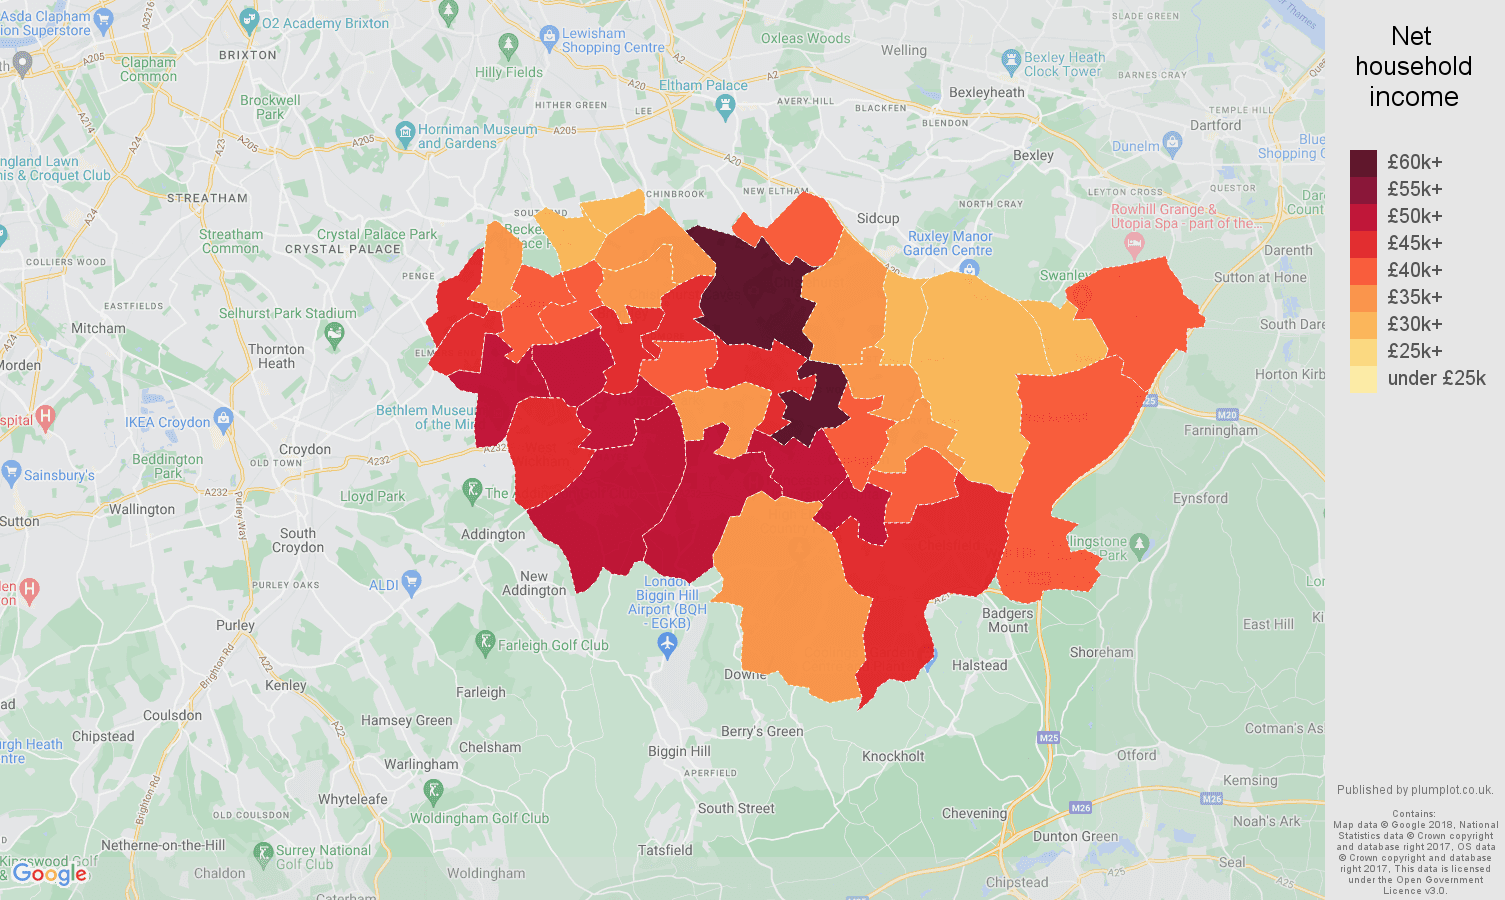 Bromley net household income map